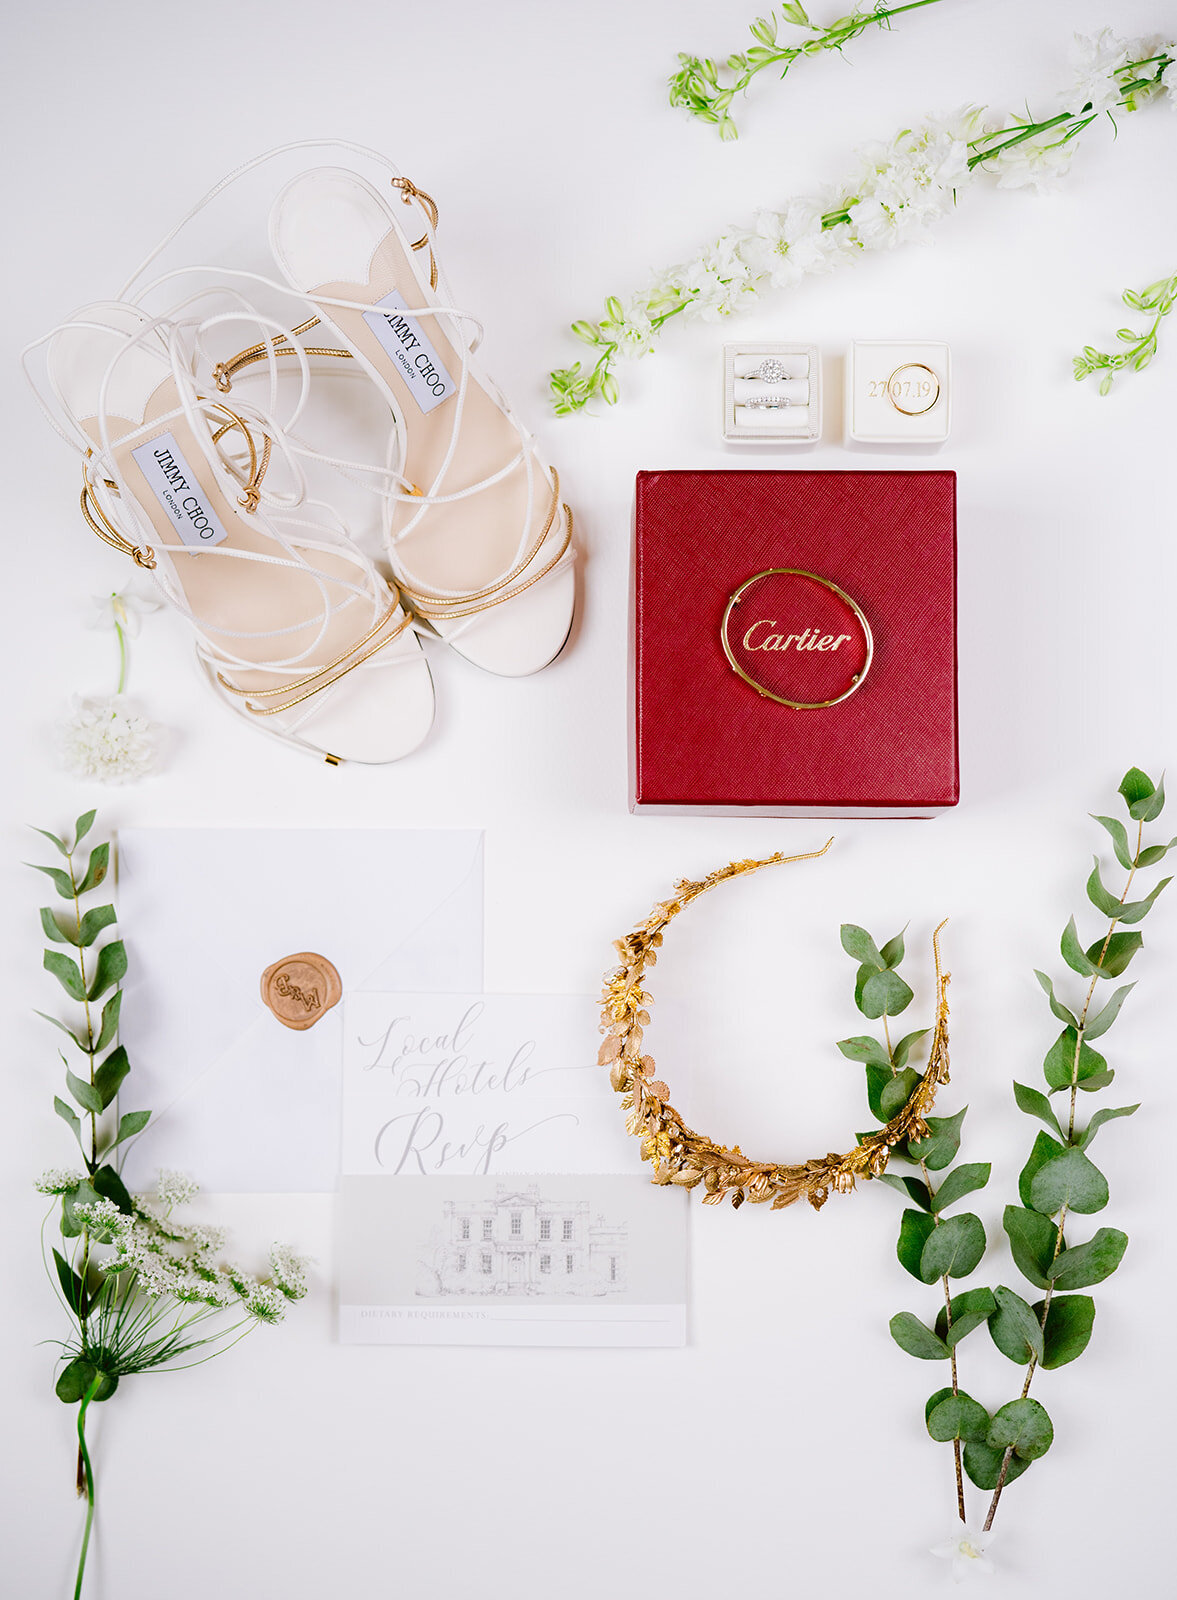 Flat lay photograph of the brides wedding details including a crown I wouldn't invitation I can't see a bracelet and Jimmy Choo wedding shoes and rings